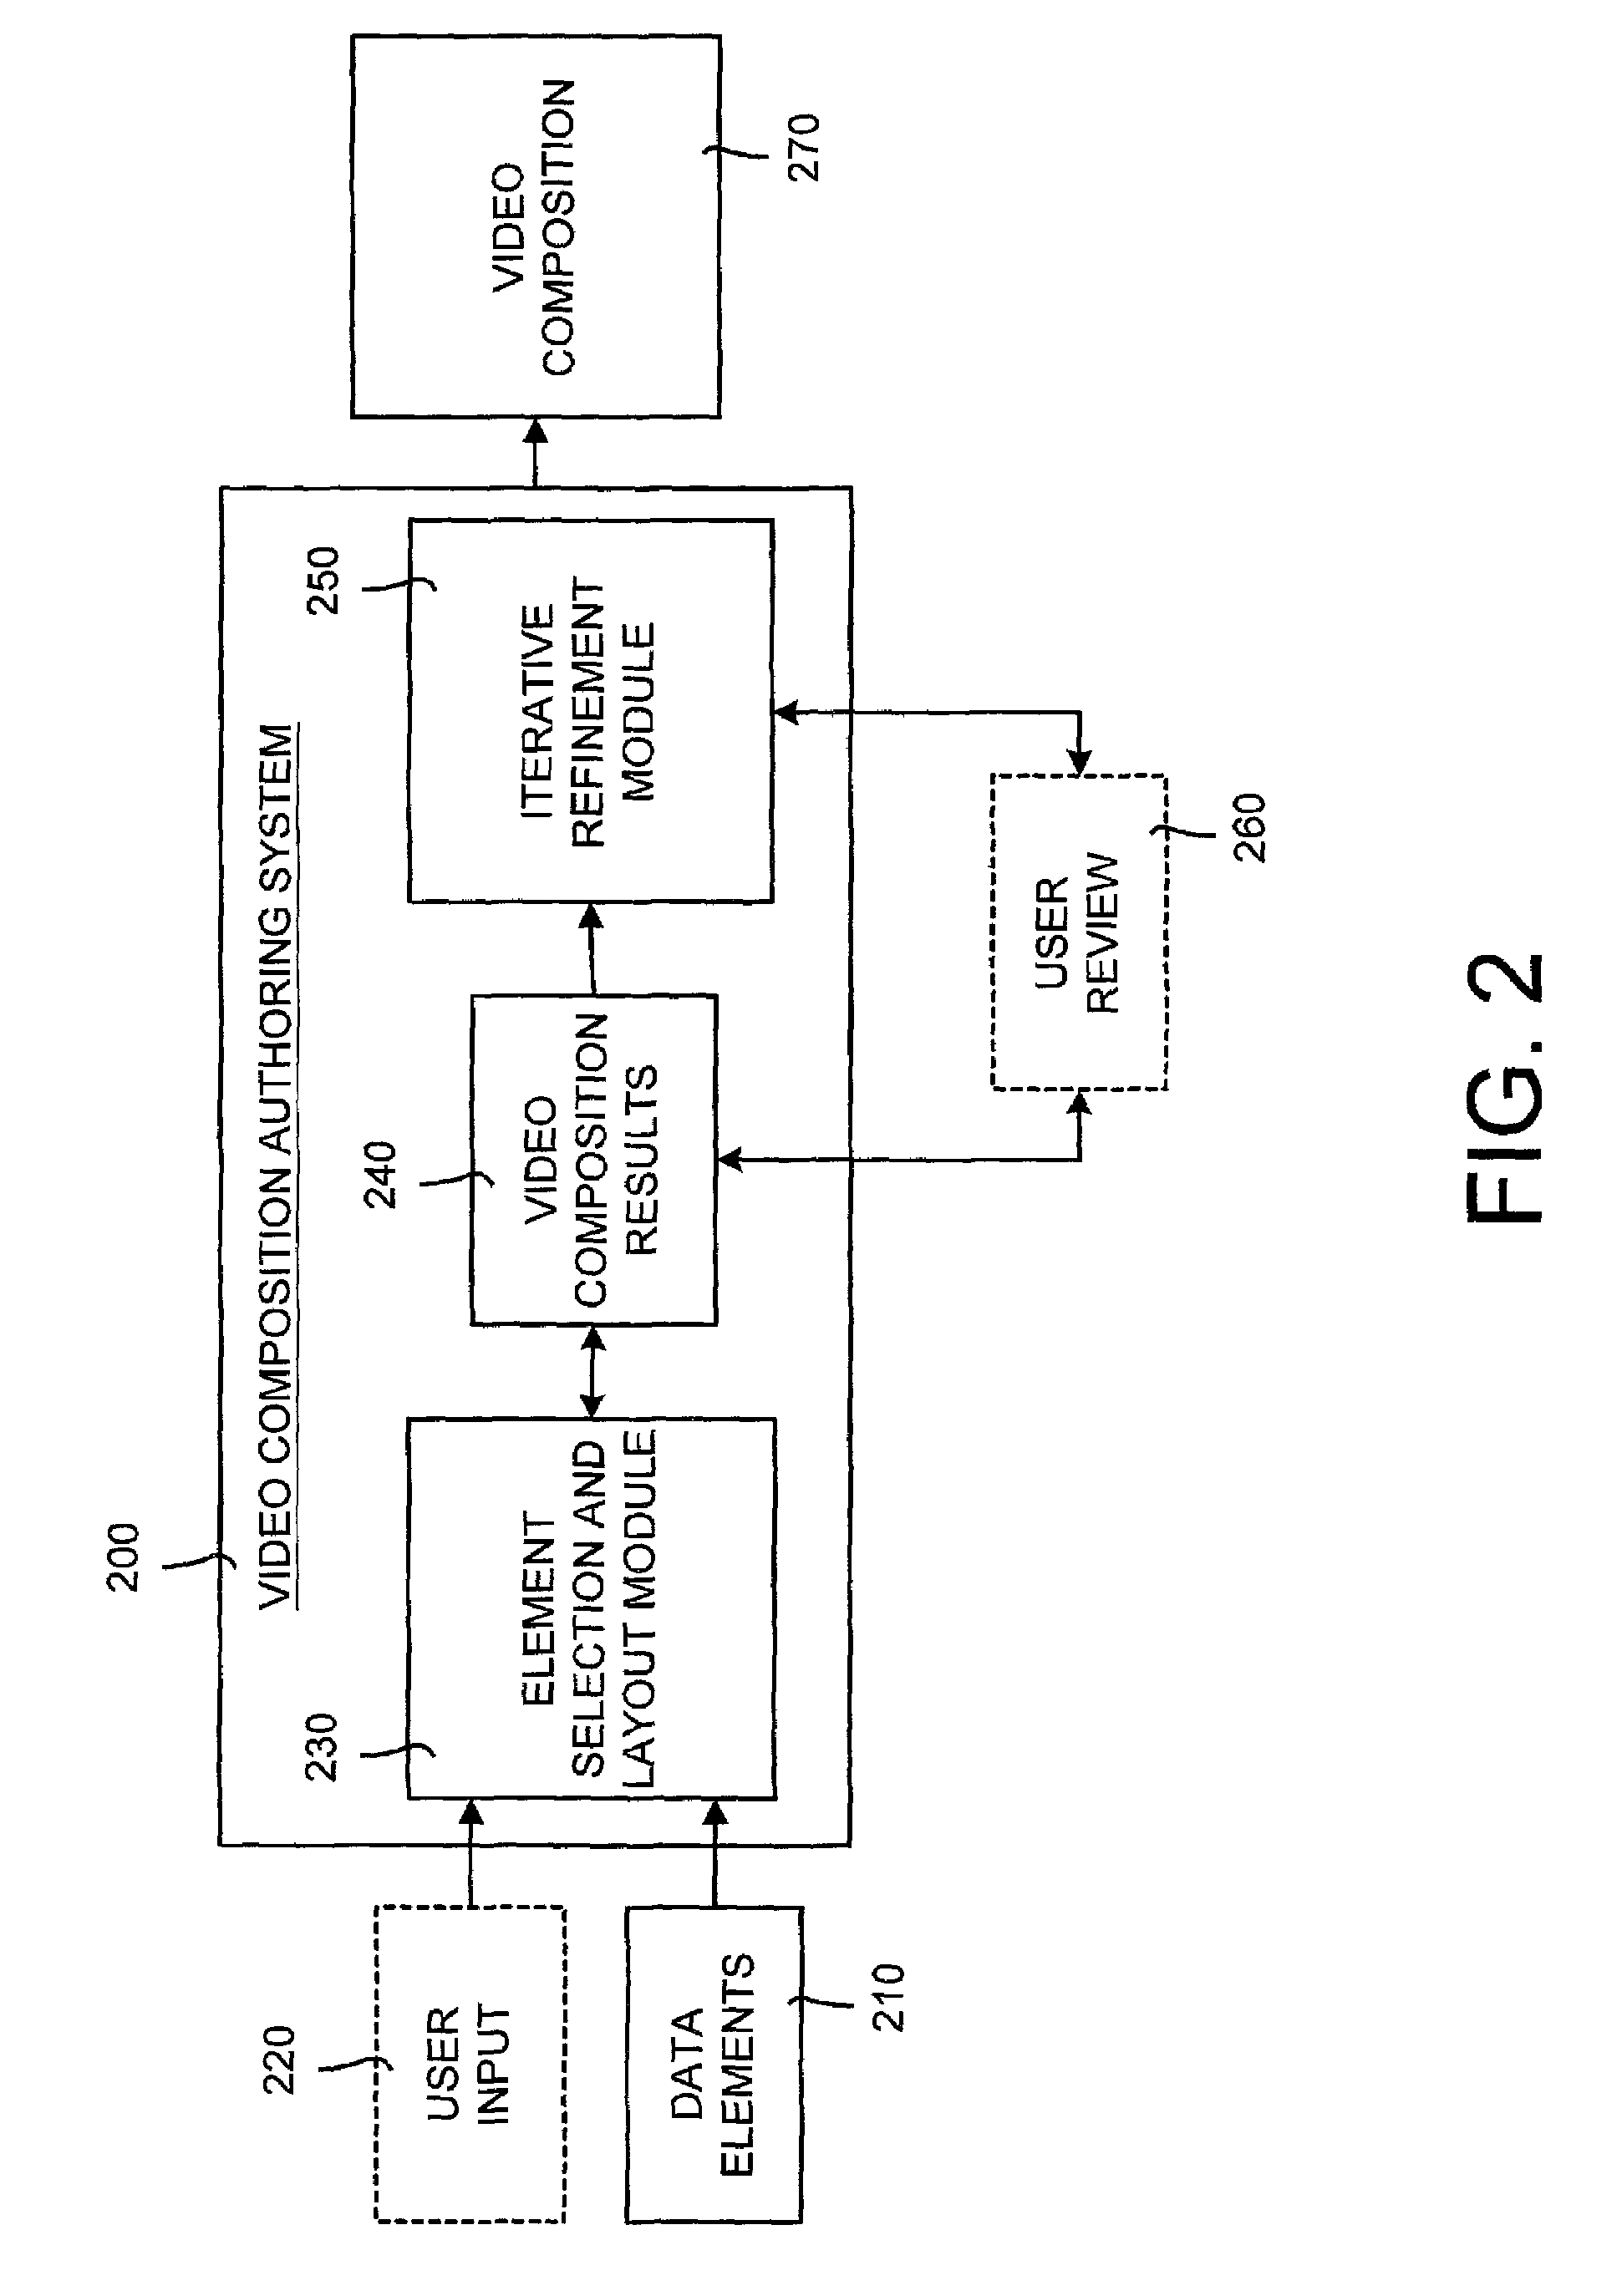 System and method for automatically authoring video compositions using video cliplets